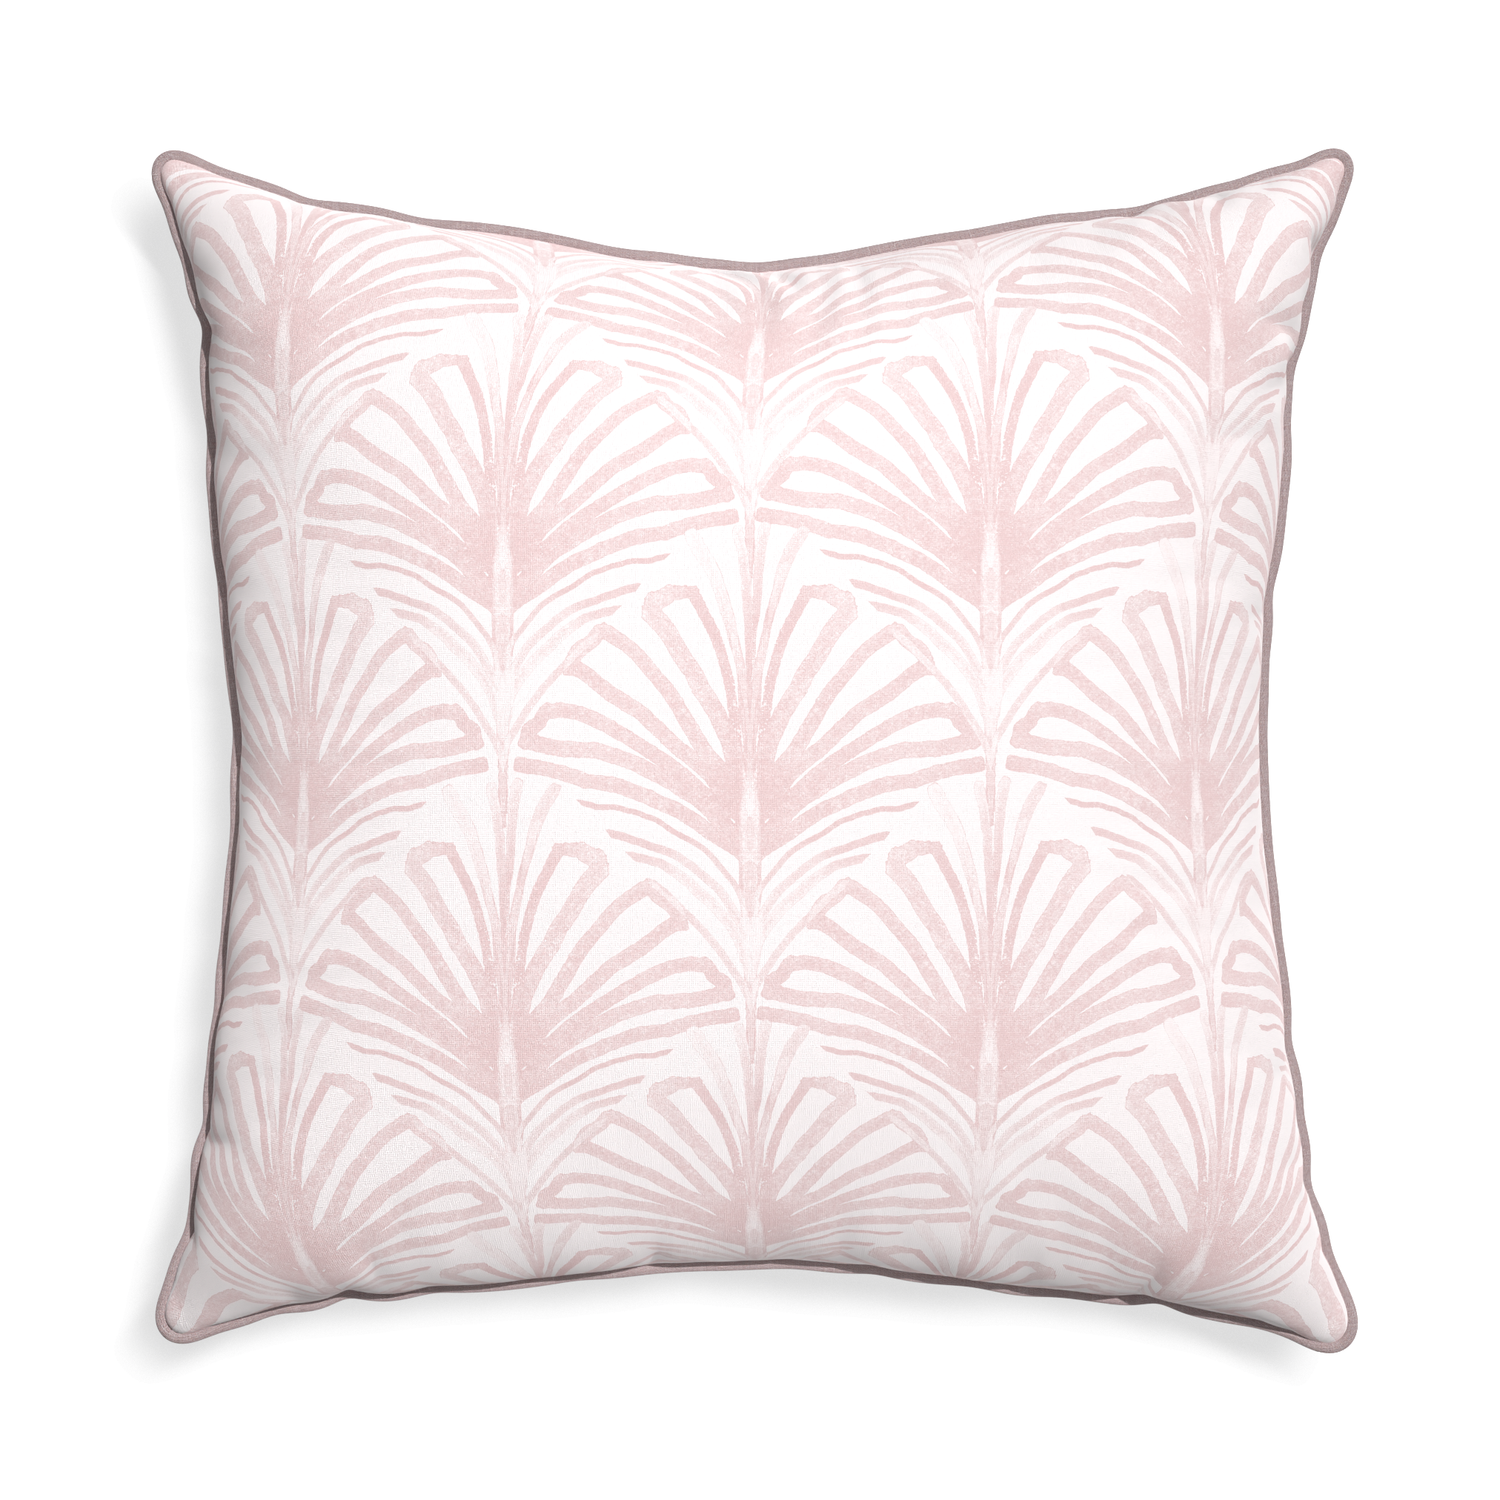 Euro-sham suzy rose custom rose pink palmpillow with orchid piping on white background